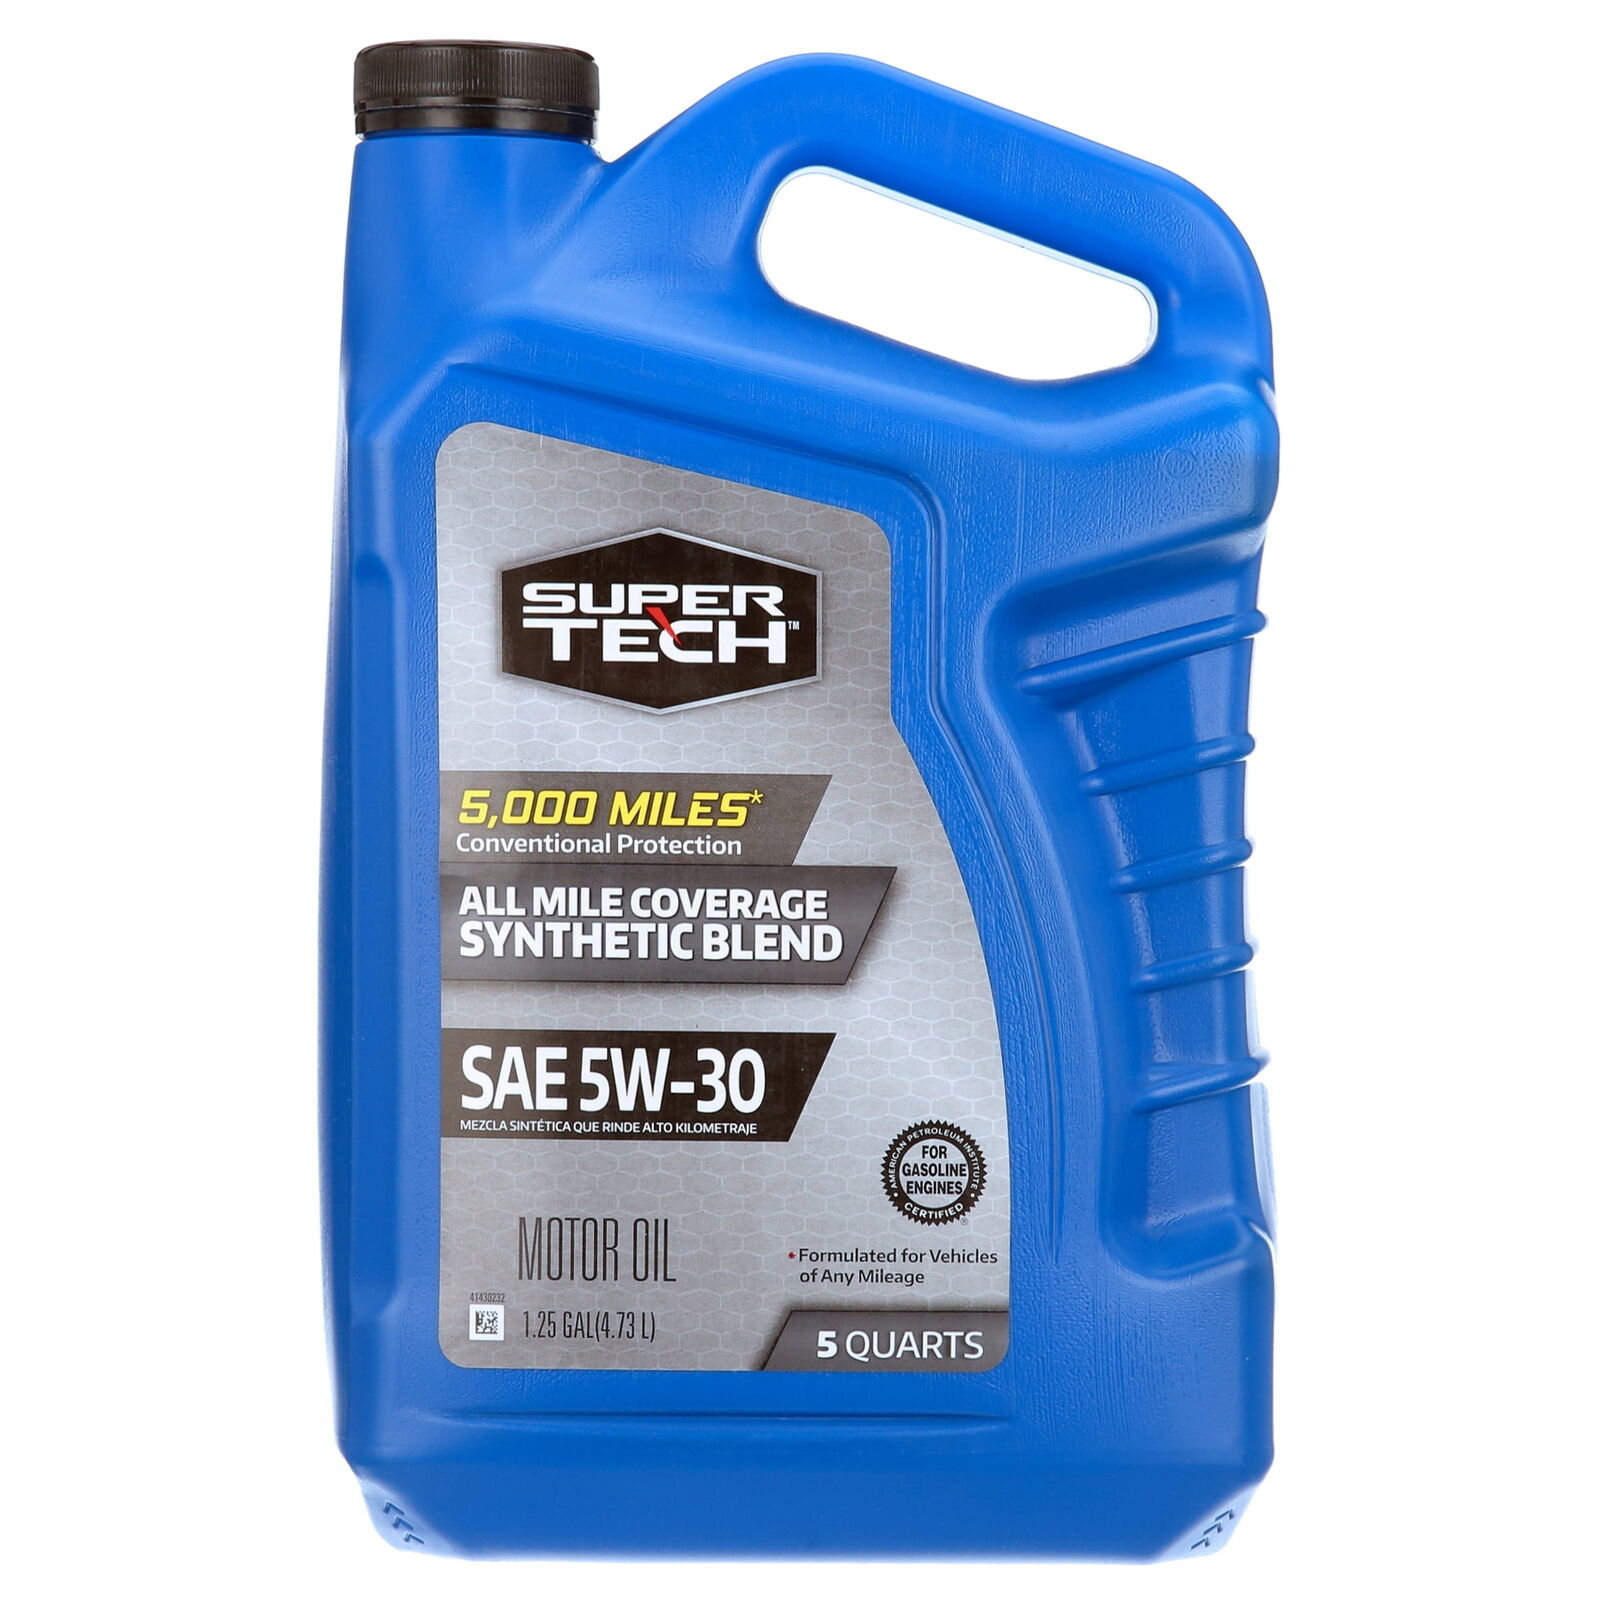 All Mileage Synthetic Blend Motor Oil SAE 5W-30, 5 Quarts